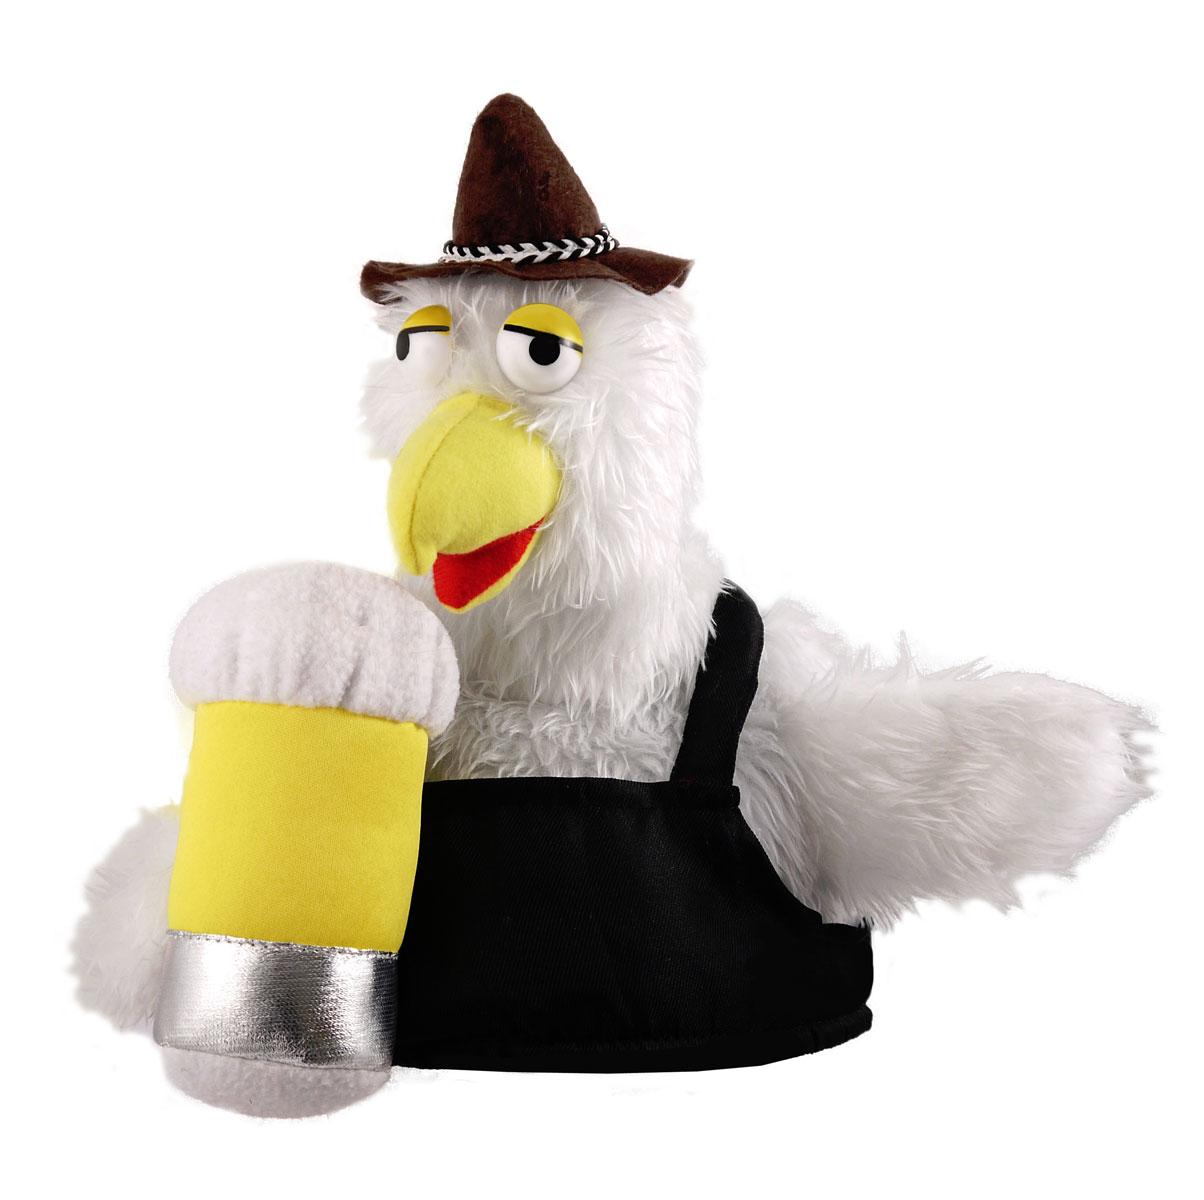 Bavarian Beer Festival Bird Hat with Beer Stein by Henbrandt H20414 available here at Karnival Costumes online party shop